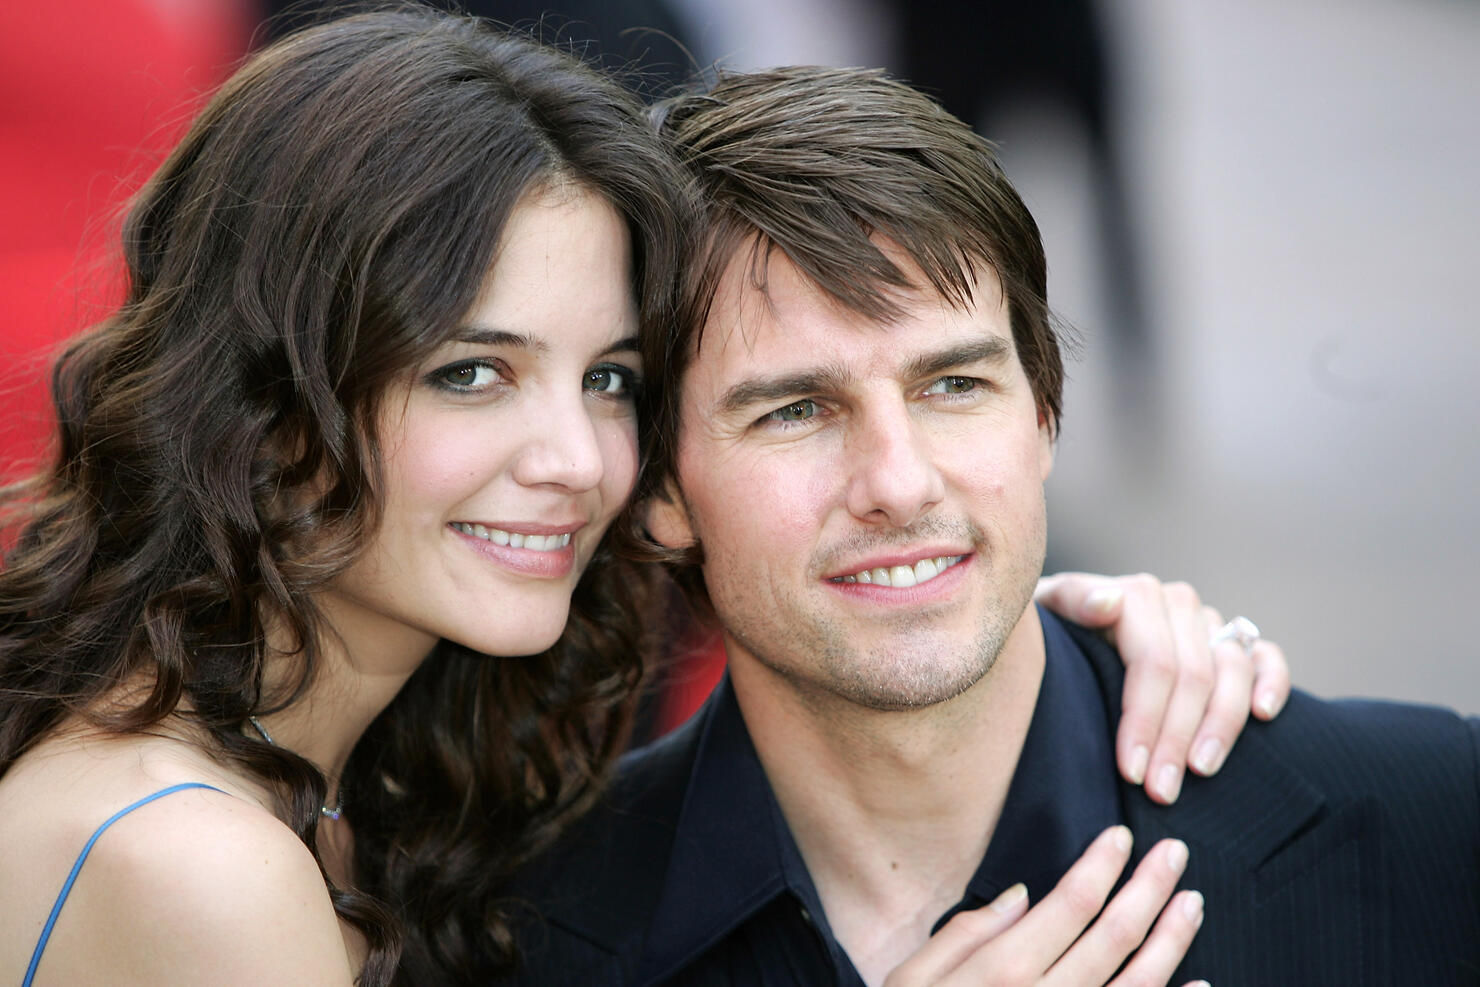 Scientology "Absolutely" Auditioned Tom Cruise Girlfriends, Says